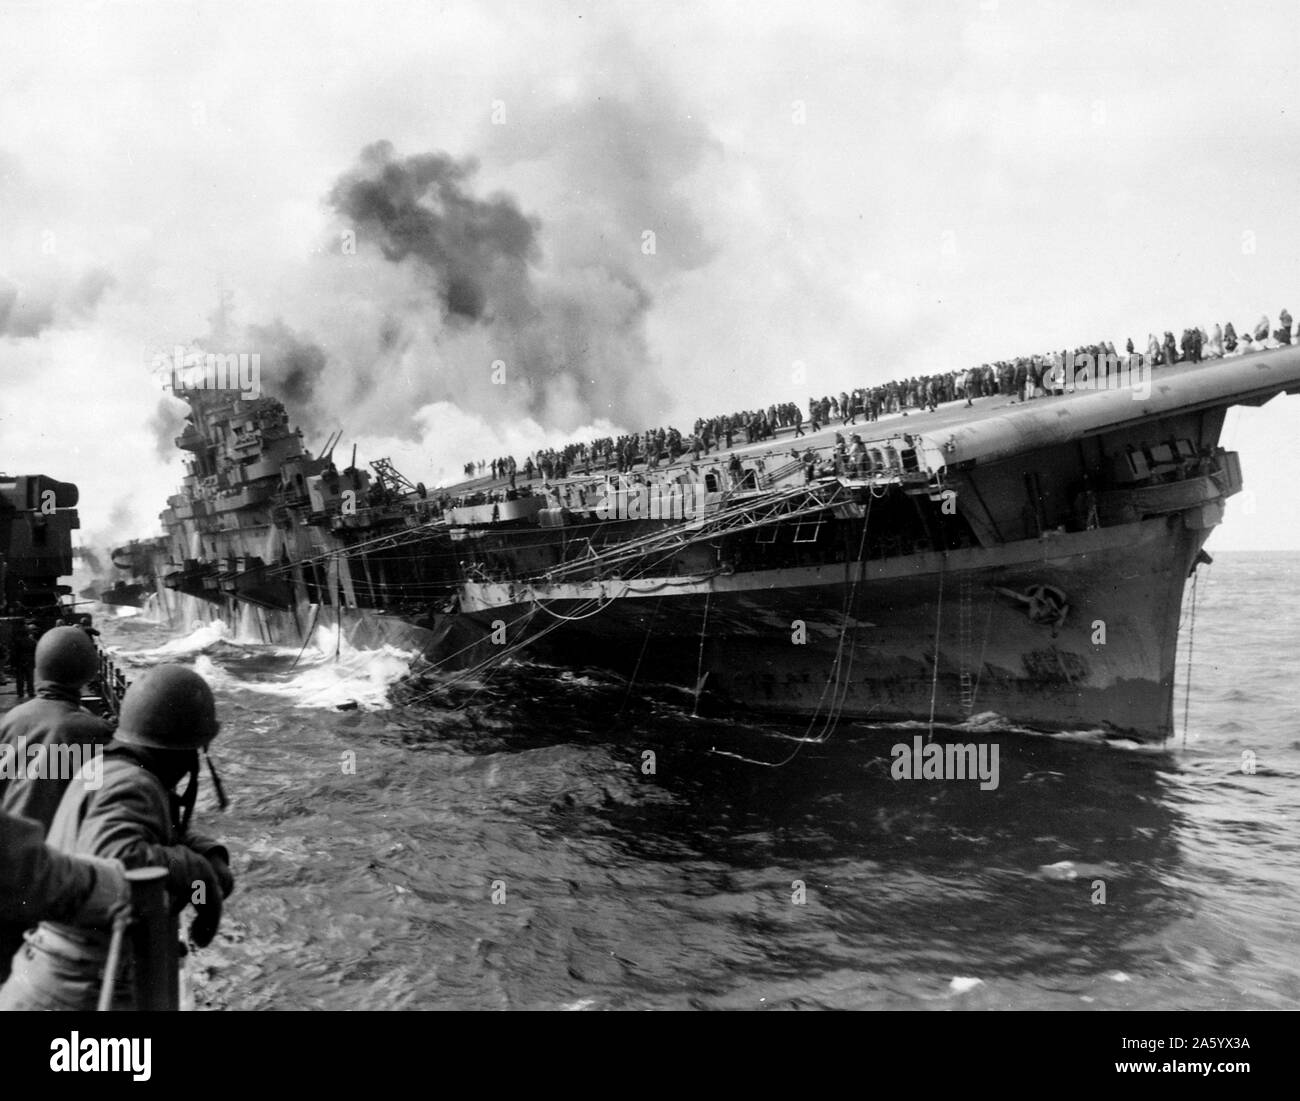 Aircraft carrier USS Franklin (CV-13) attacked by Japanese navy, during World War II, March 19, 1945. Stock Photo